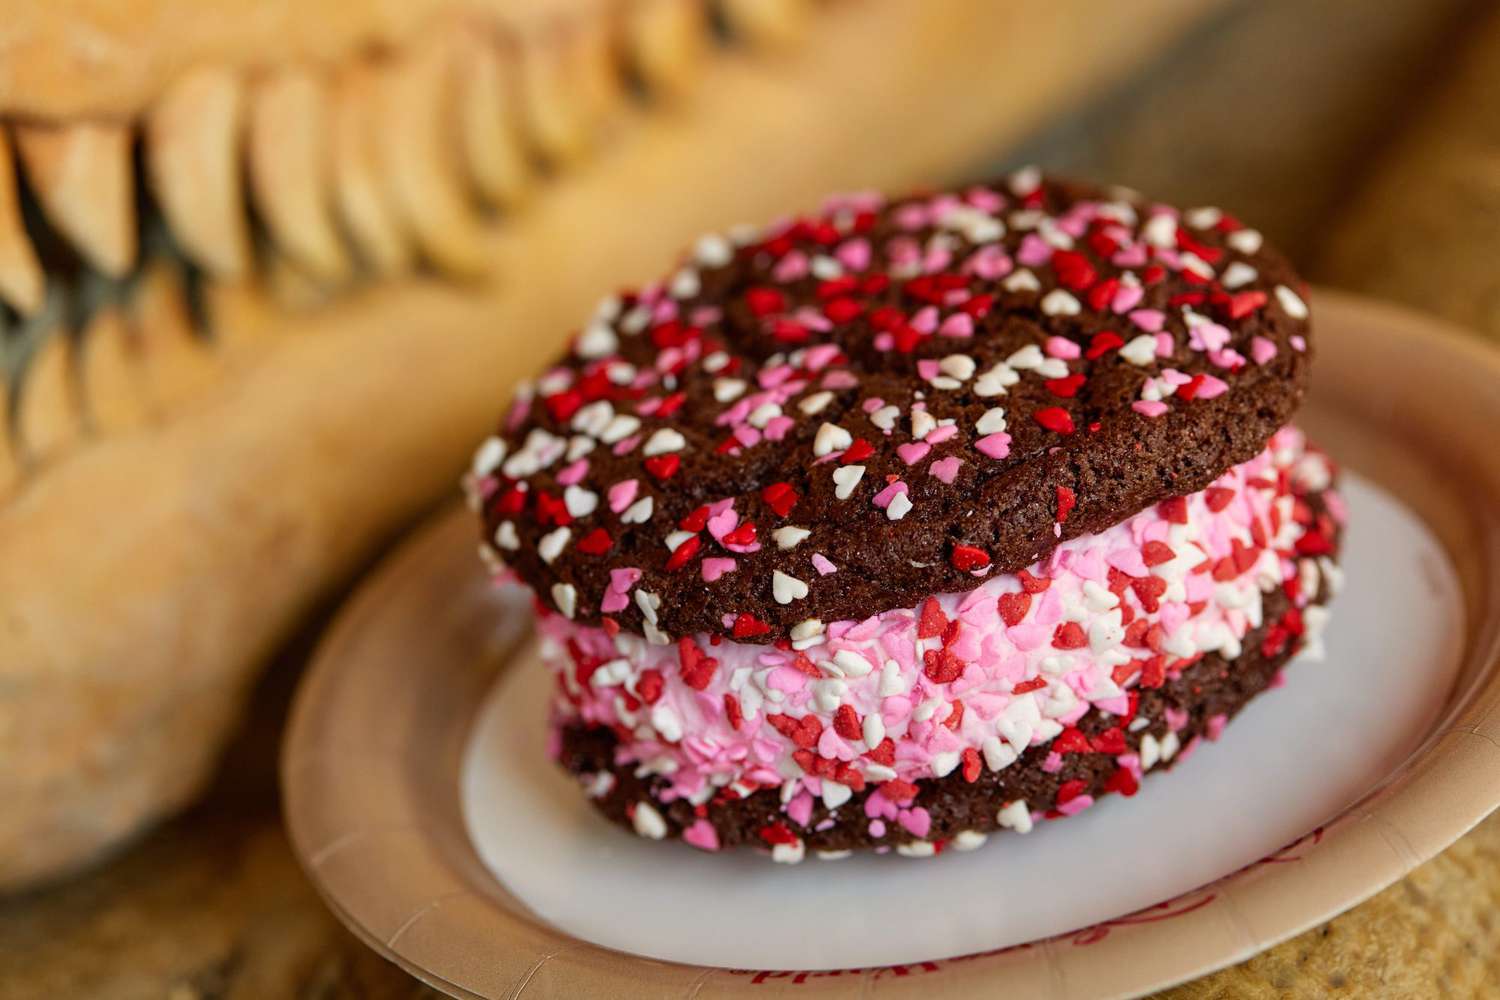 Disney-themed ice cream sandwich with chocolate cookies and pink ice cream decorated with red, pink, and white mini heart candies